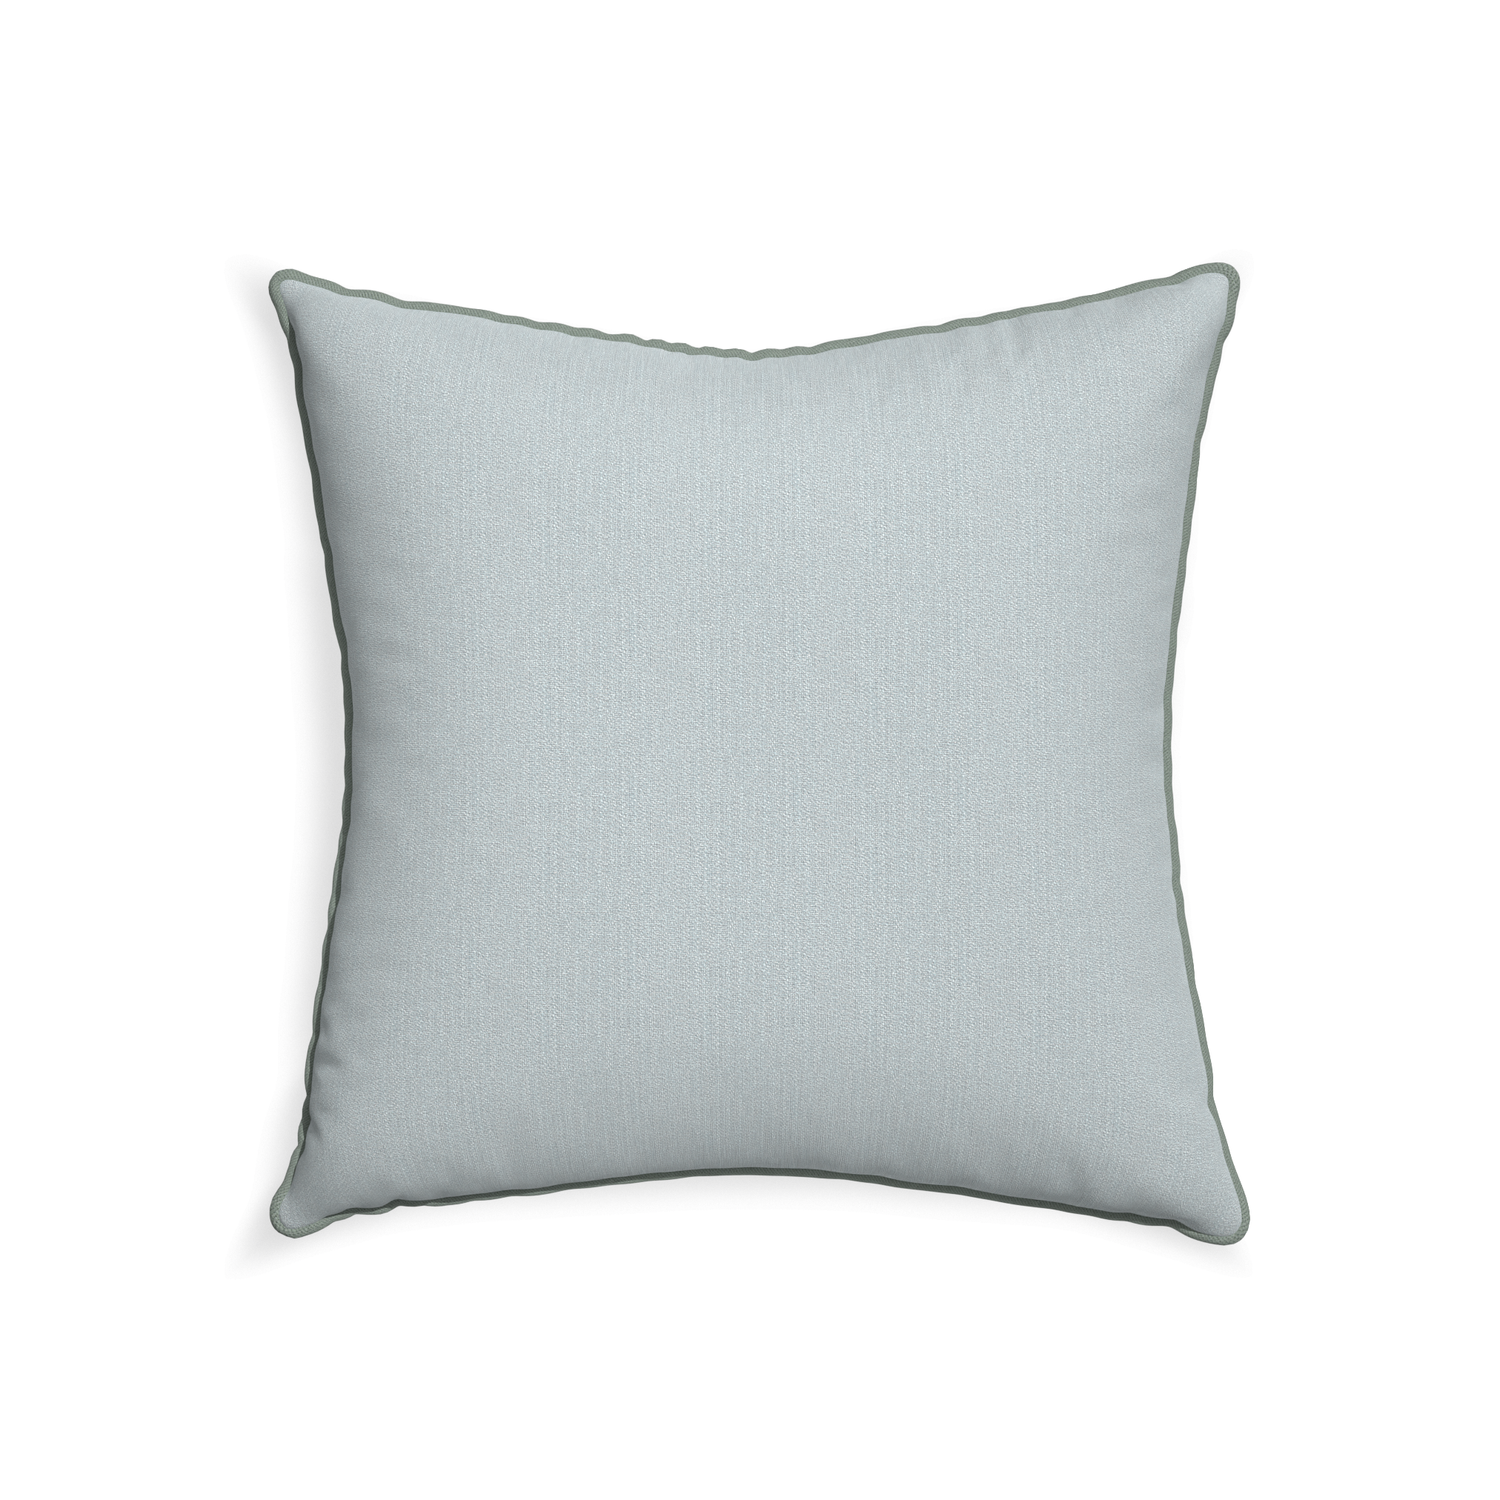 22-square sea custom grey bluepillow with sage piping on white background